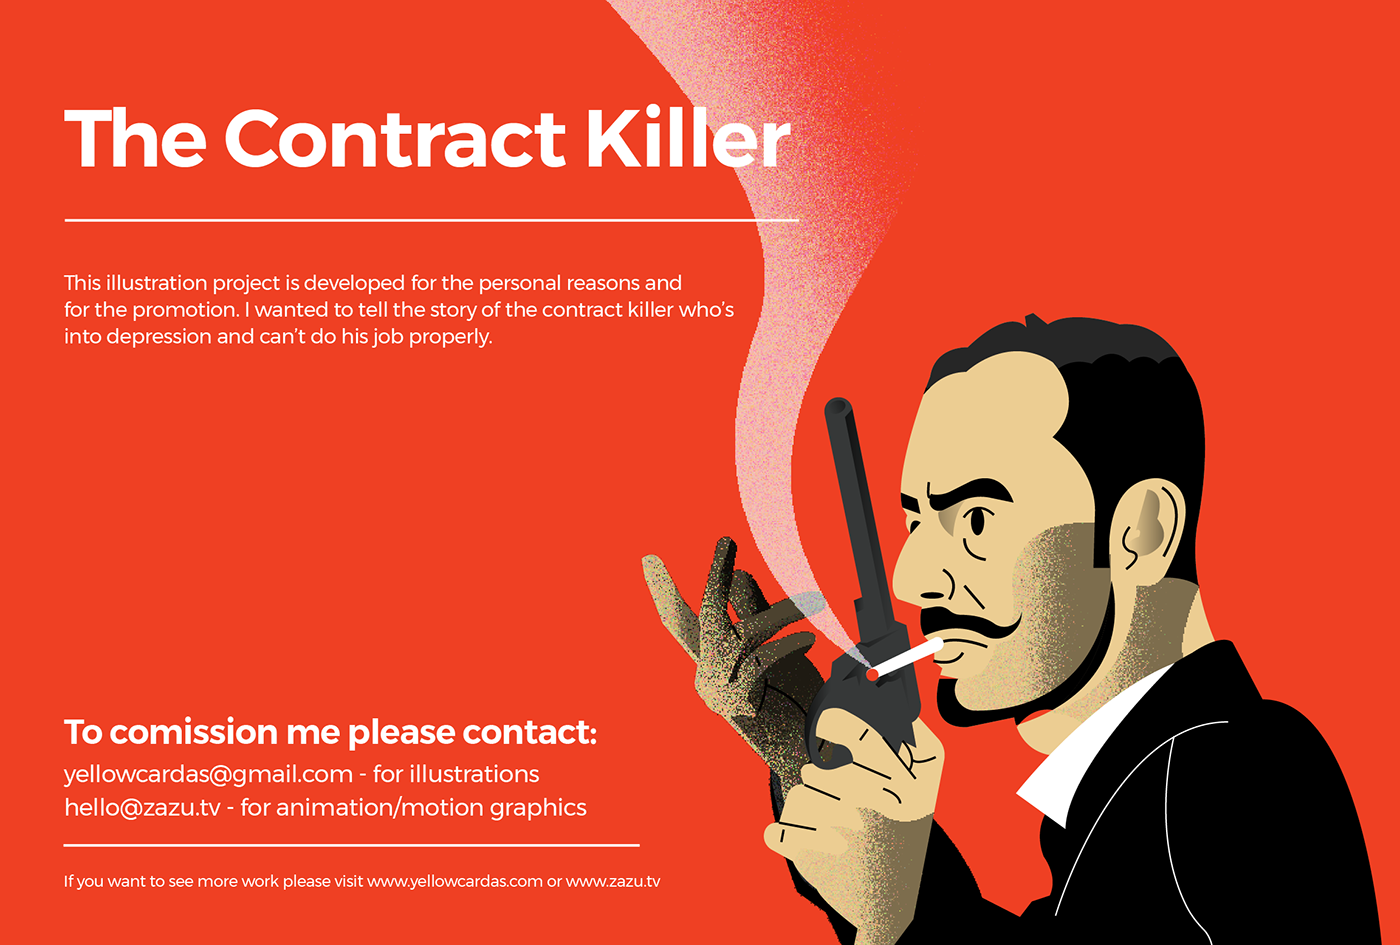 essay on contract killer